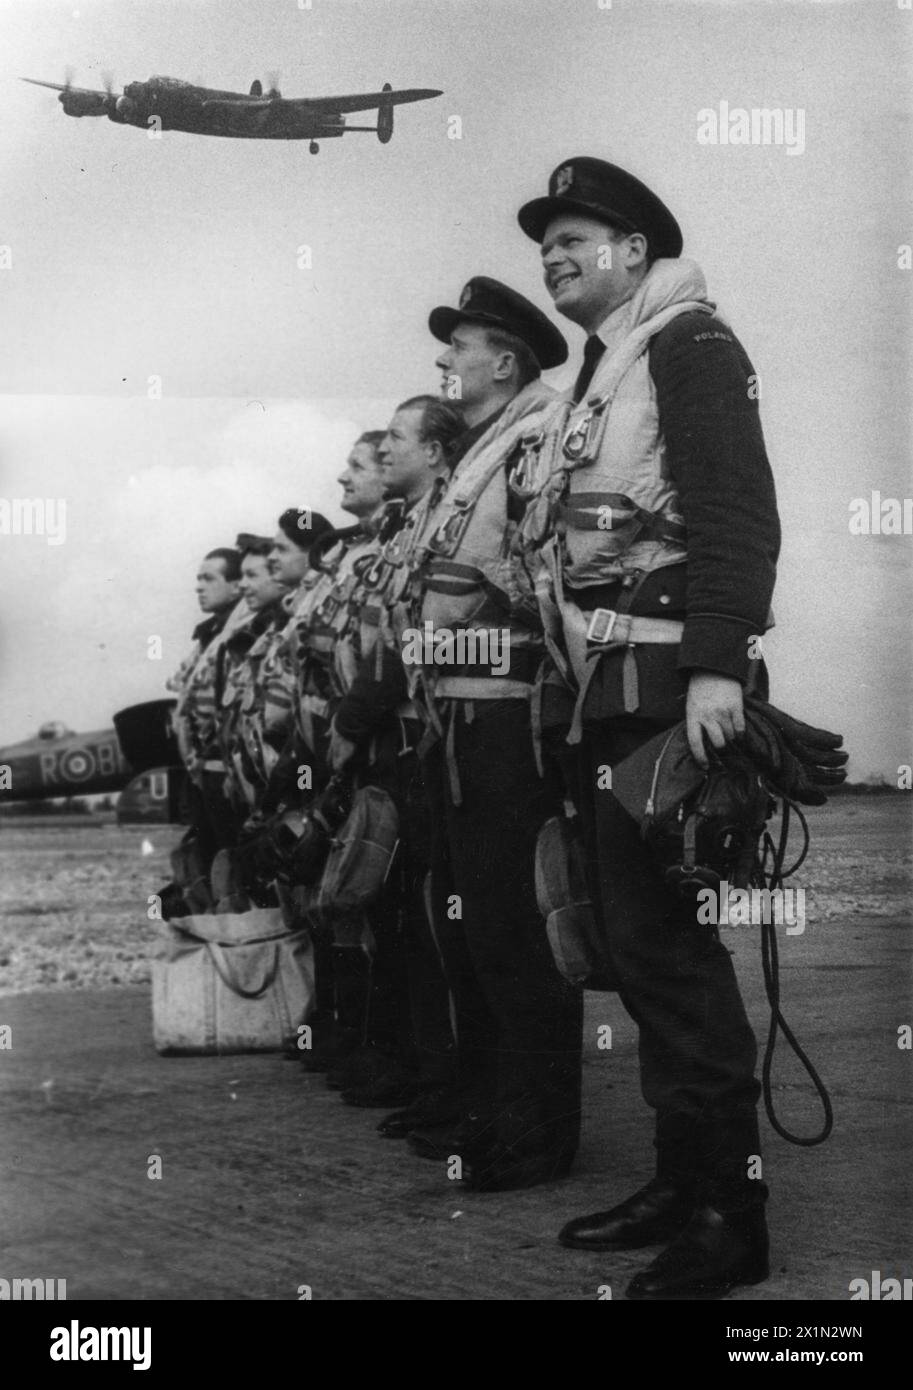 THE POLISH AIR FORCE IN BRITAIN, 1940-1947 - Flying Officer Jerzy Różański (foreground) and his crew of No. 300 Polish Bomber Squadron standing in line at RAF Faldingworth, early June 1944. The crew perished during the bombing sortie over Gelsenkirchen shortly after this picture was taken, on 12/13 June 1944,Note a Lancaster bomber flying over the airfield and another one parked in the background (ED327, BH-R - lost in August 1944), Polish Air Force, Polish Air Force, 300 'Land of Masovia' Bomber Squadron, Różański, Jerzy Stock Photo